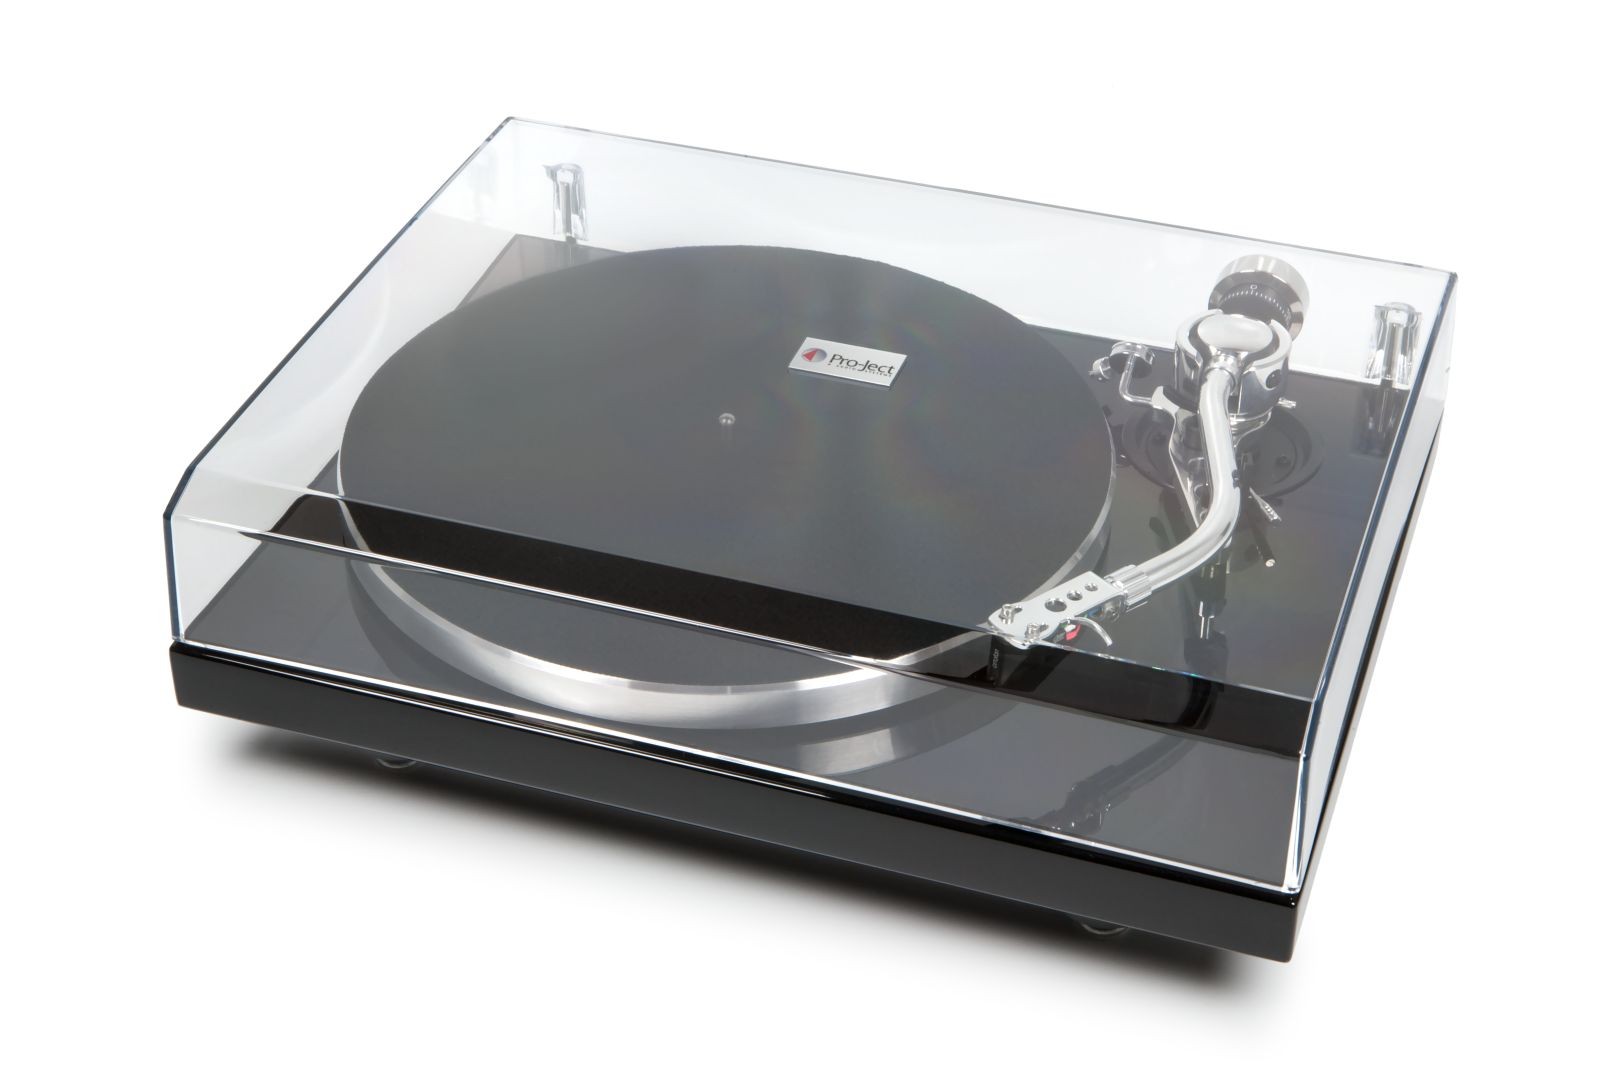 Turntable Pro-Ject 1XPRESSION CARBON CLASSIC S-Shape - PIANO